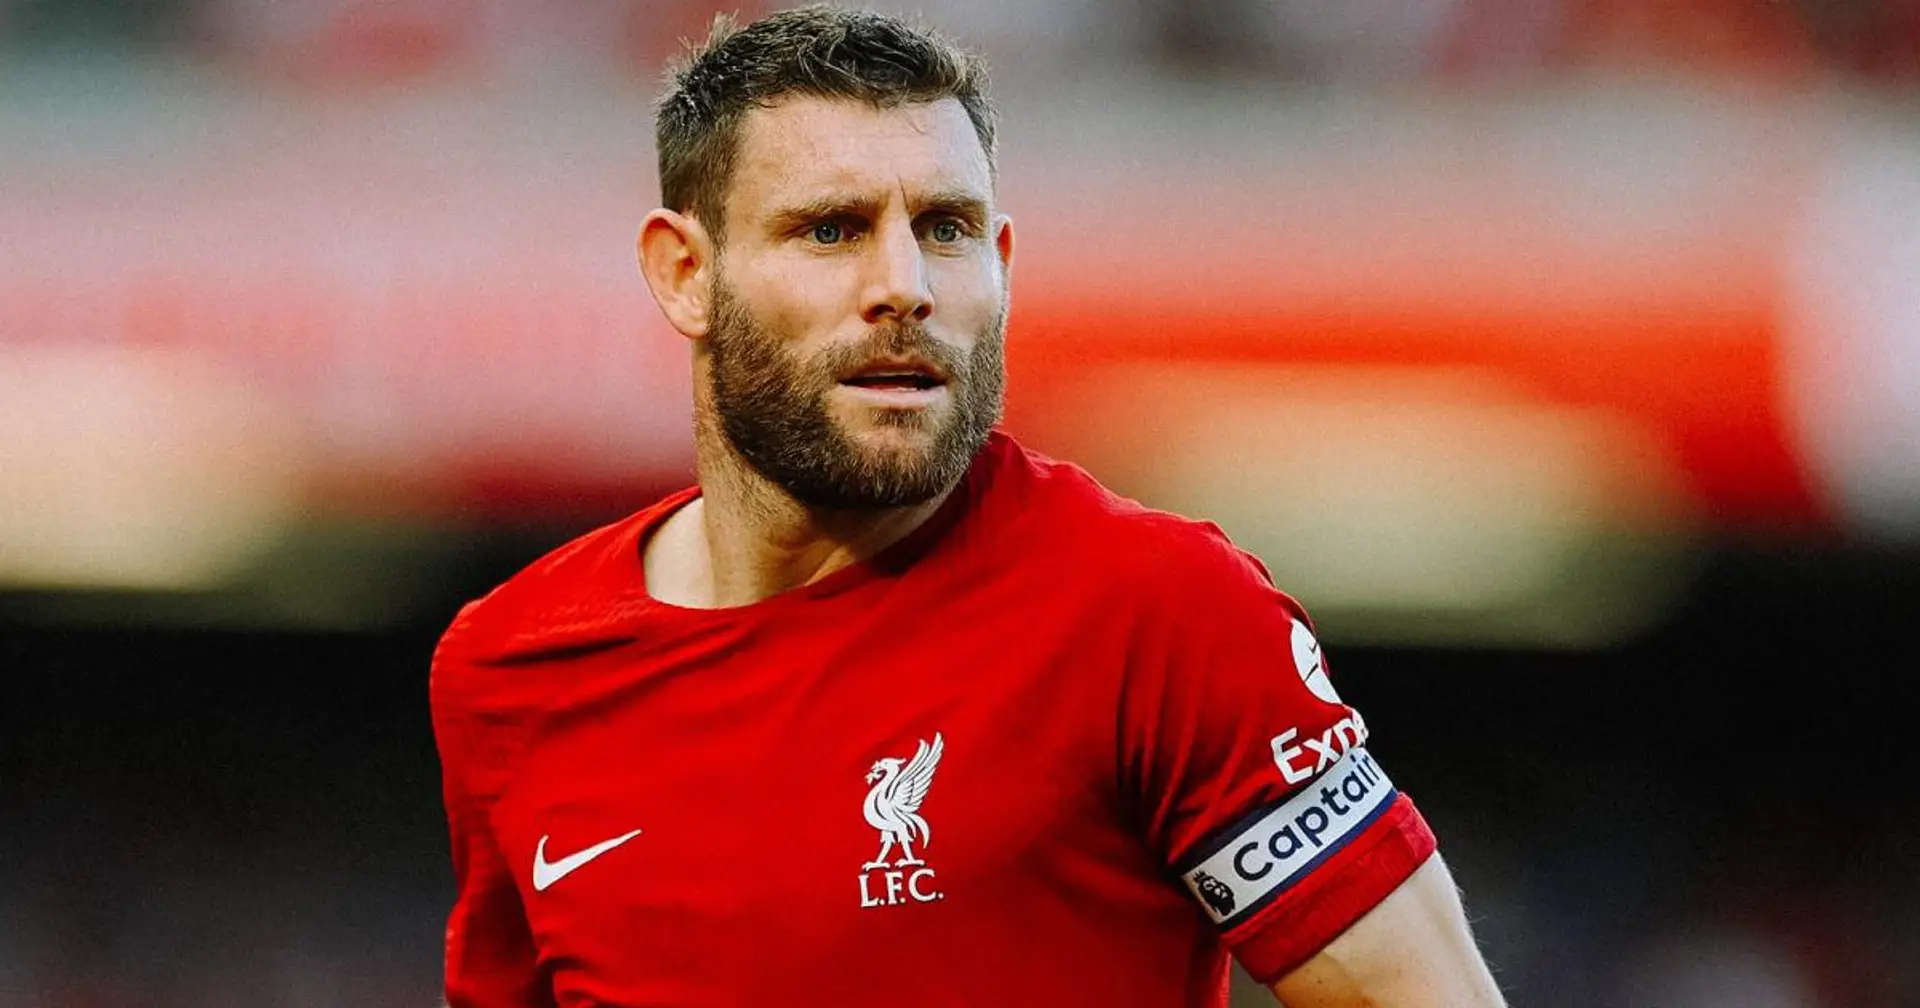 James Milner could be in line for ‘one-year contract extension’